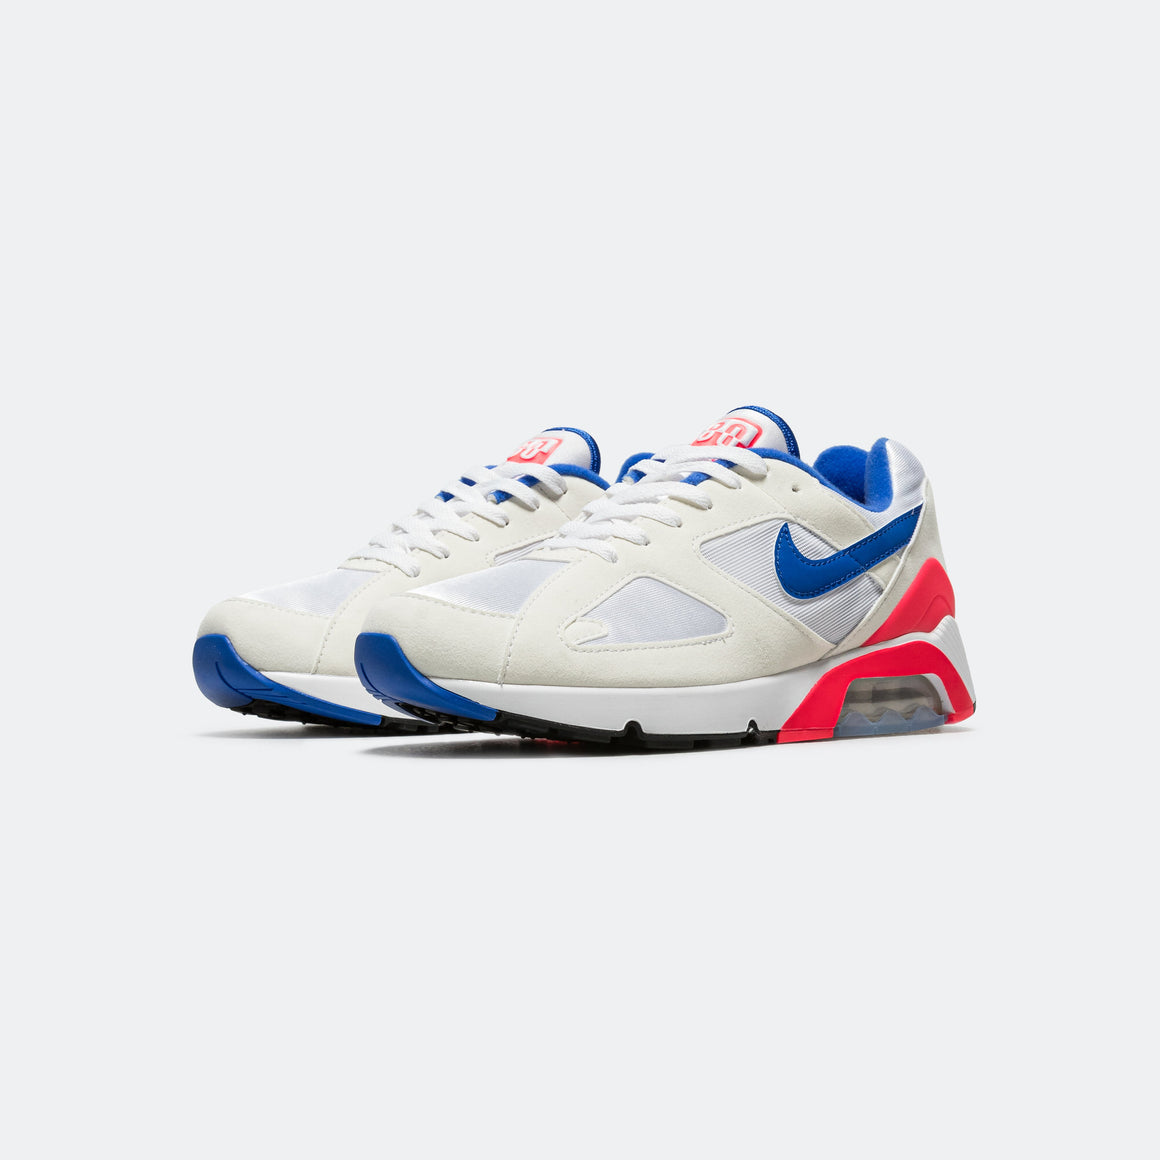 Nike - Air Max 180 - White/Ultramarine-Solar Red-Black - UP THERE